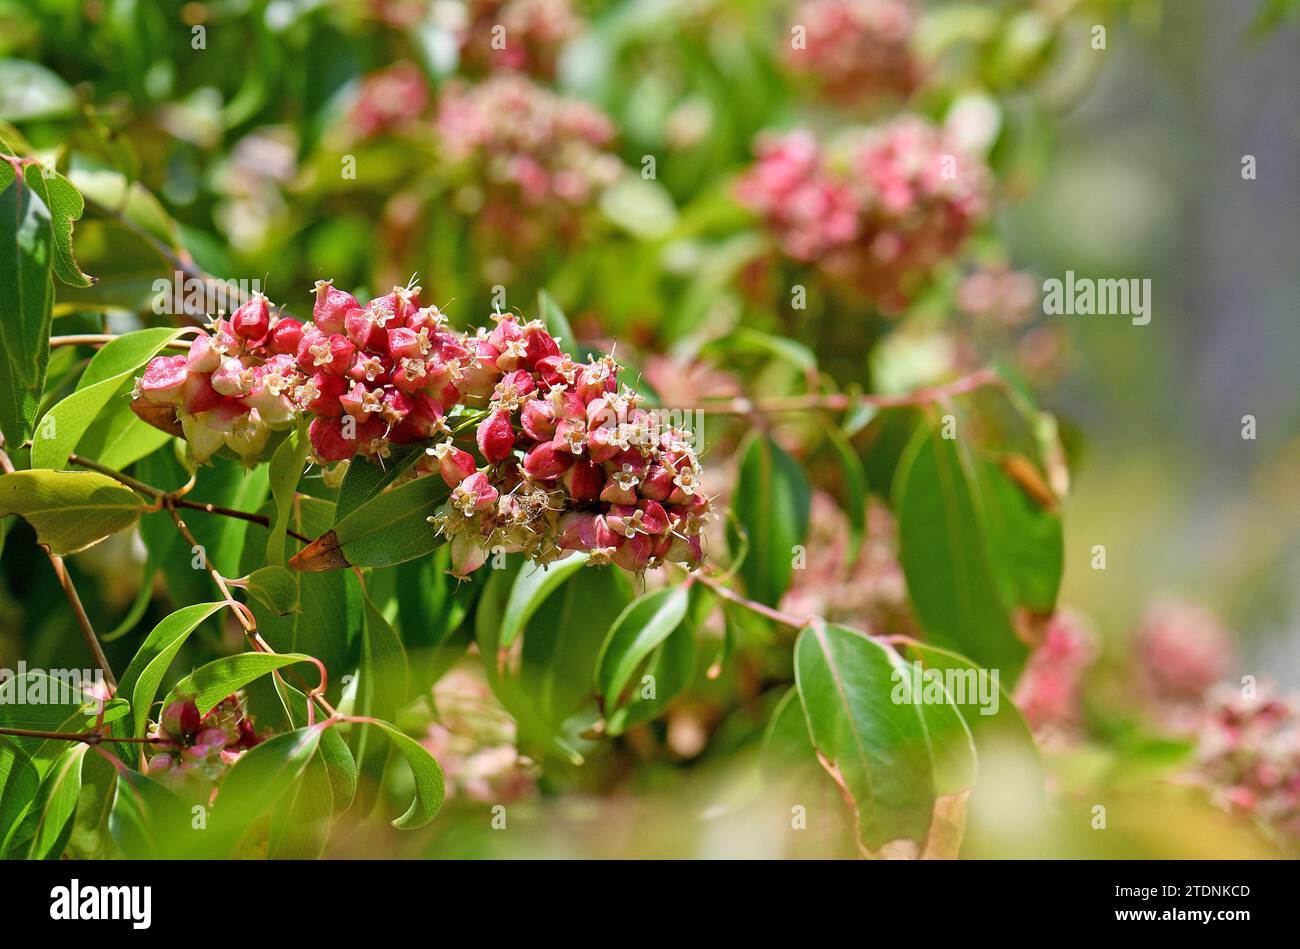 Pink fruits or seed pods and glossy aromatic leaves of the rare Australian native small rainforest tree Backhousia tetraptera, family Myrtaceae. Stock Photo